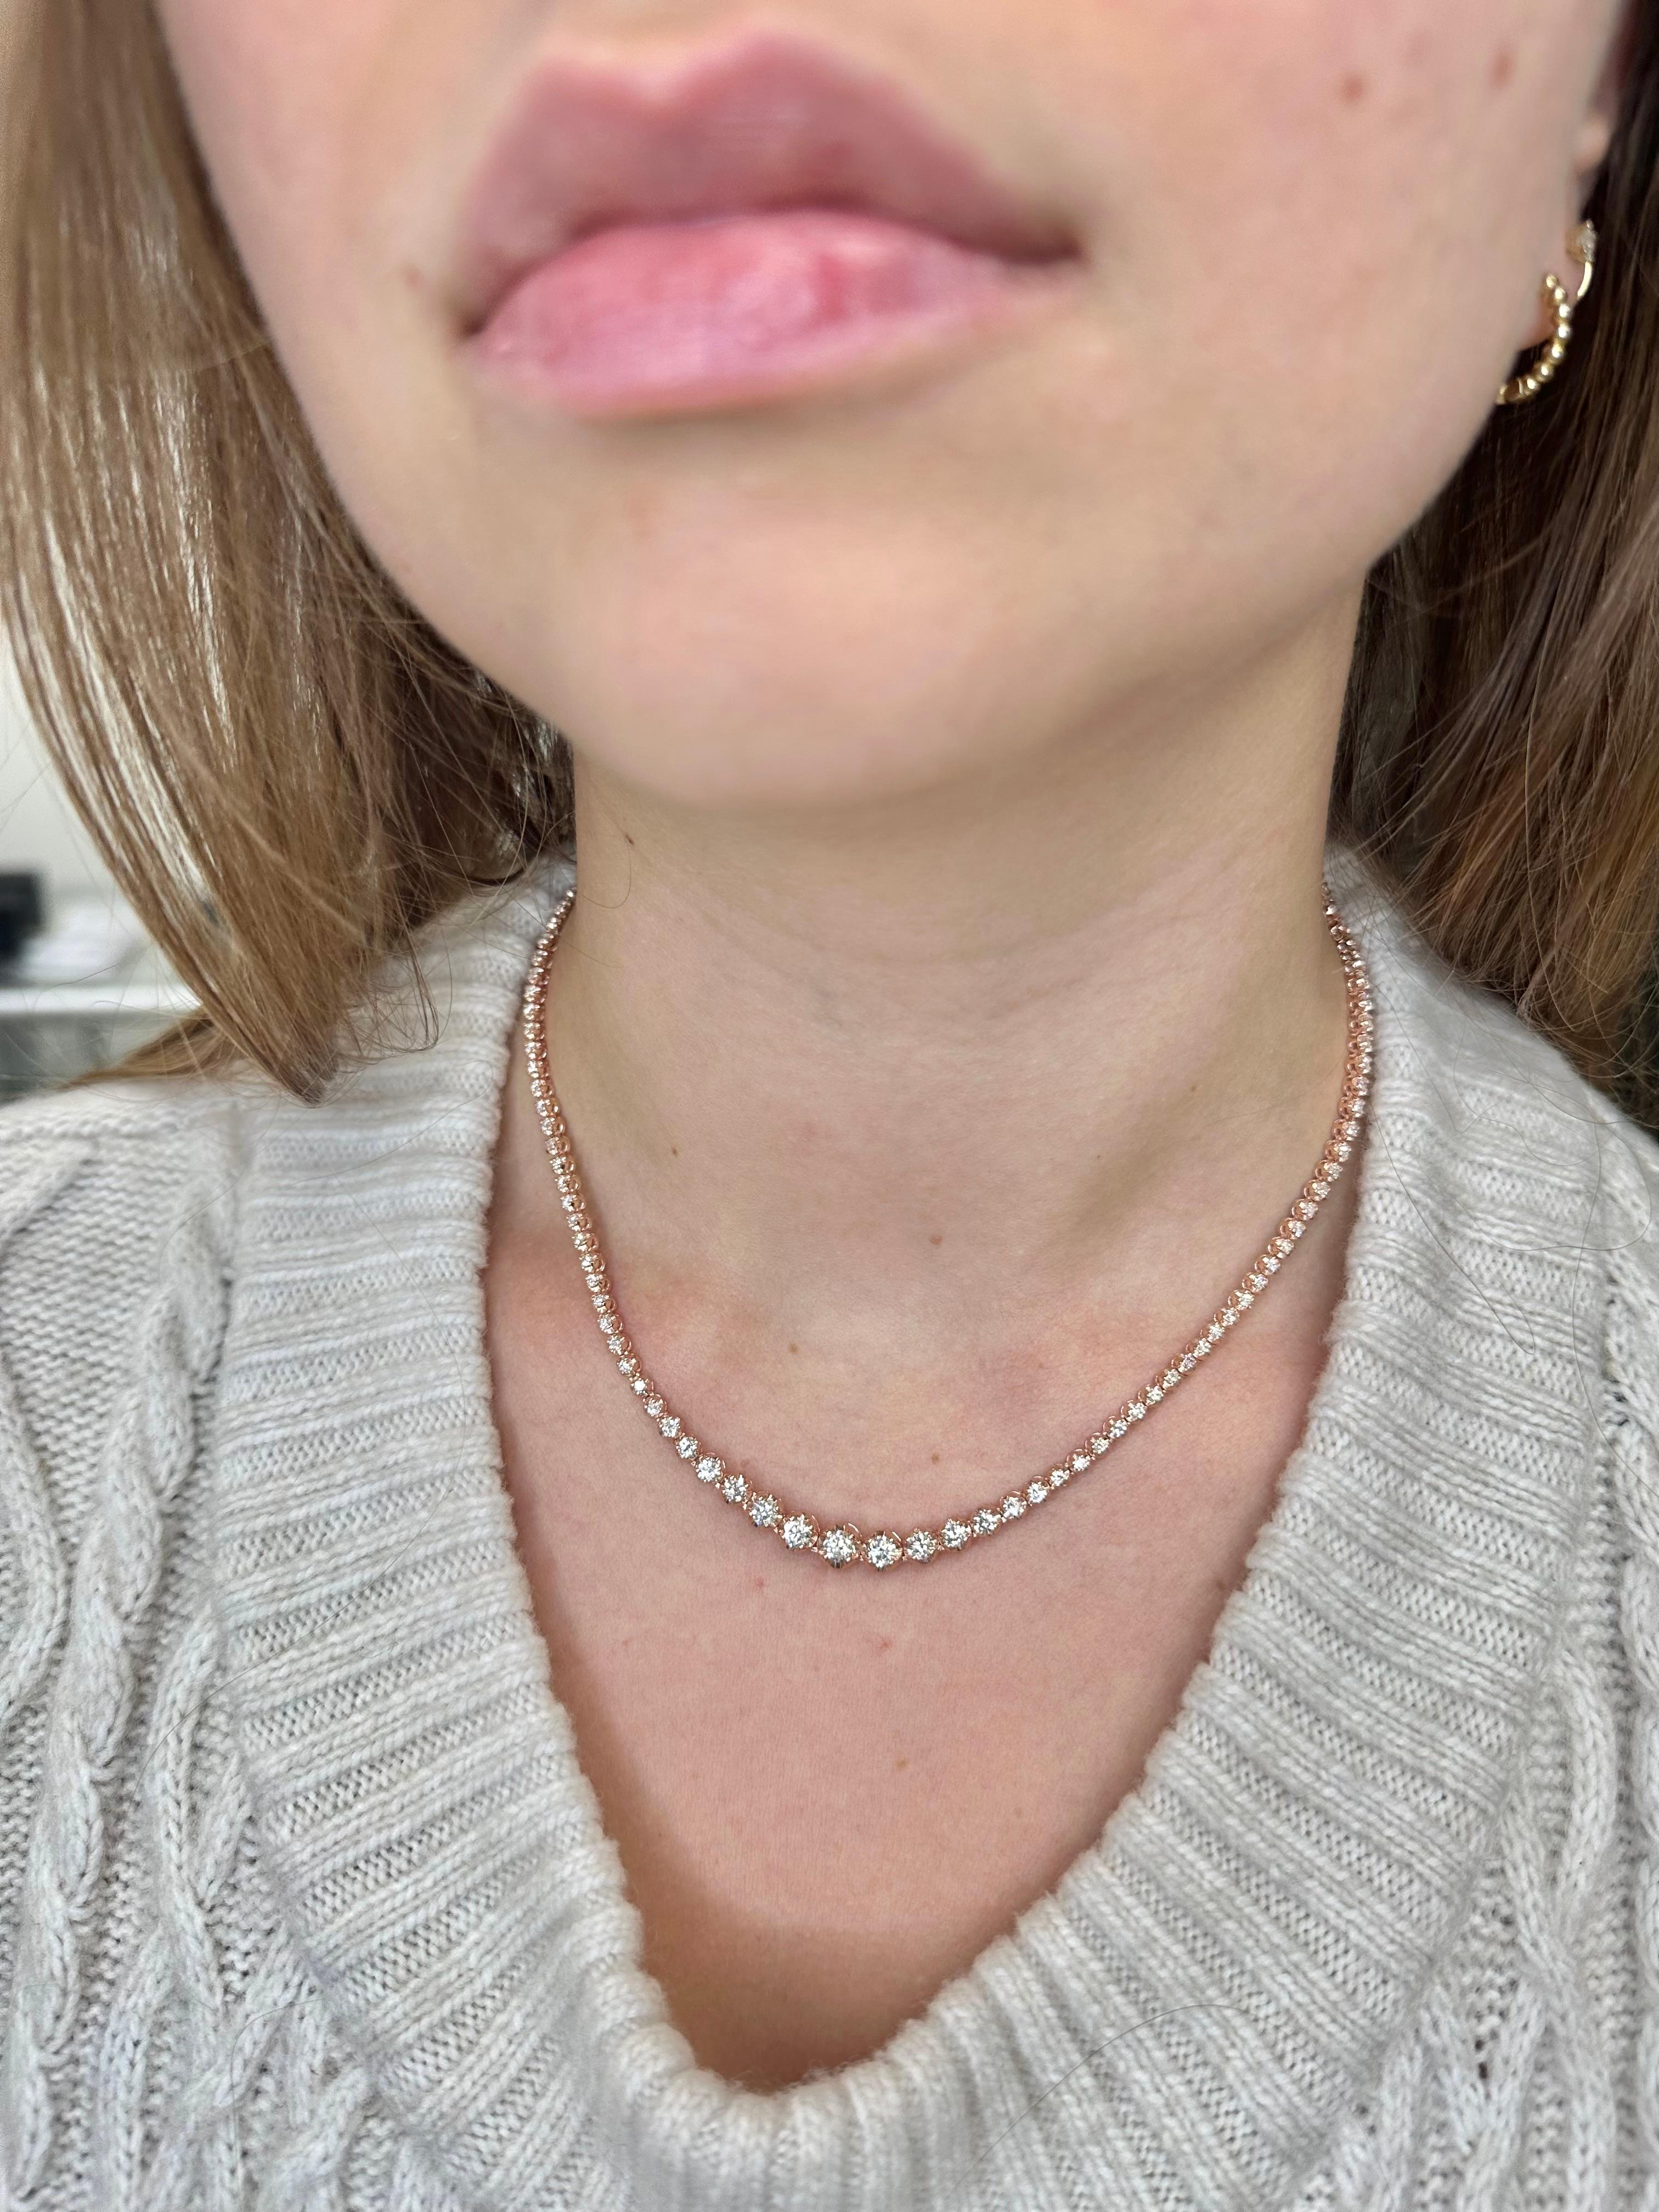 The 5.30 Carat Graduated Diamond Tennis Necklace in Rose Gold by Gem Jewelers Co. - a masterpiece that will leave you breathless!

This tennis necklace is a true work of art, designed with extreme care and attention to detail. The delicate 14K Rose